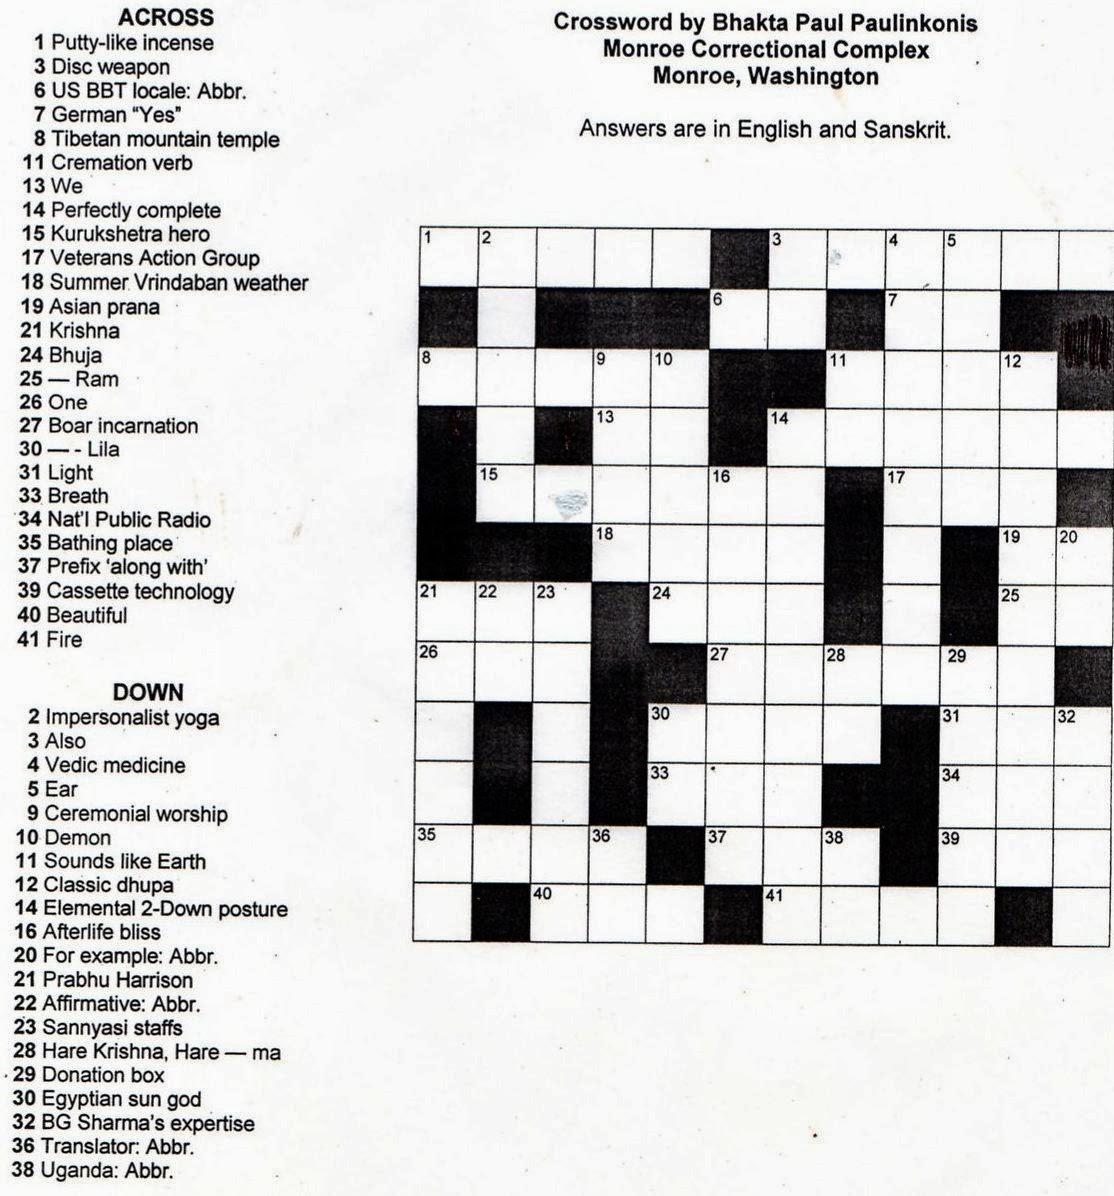 5 Printable Crossword Puzzles For Christmas - Printable Crossword Puzzles Grade 5